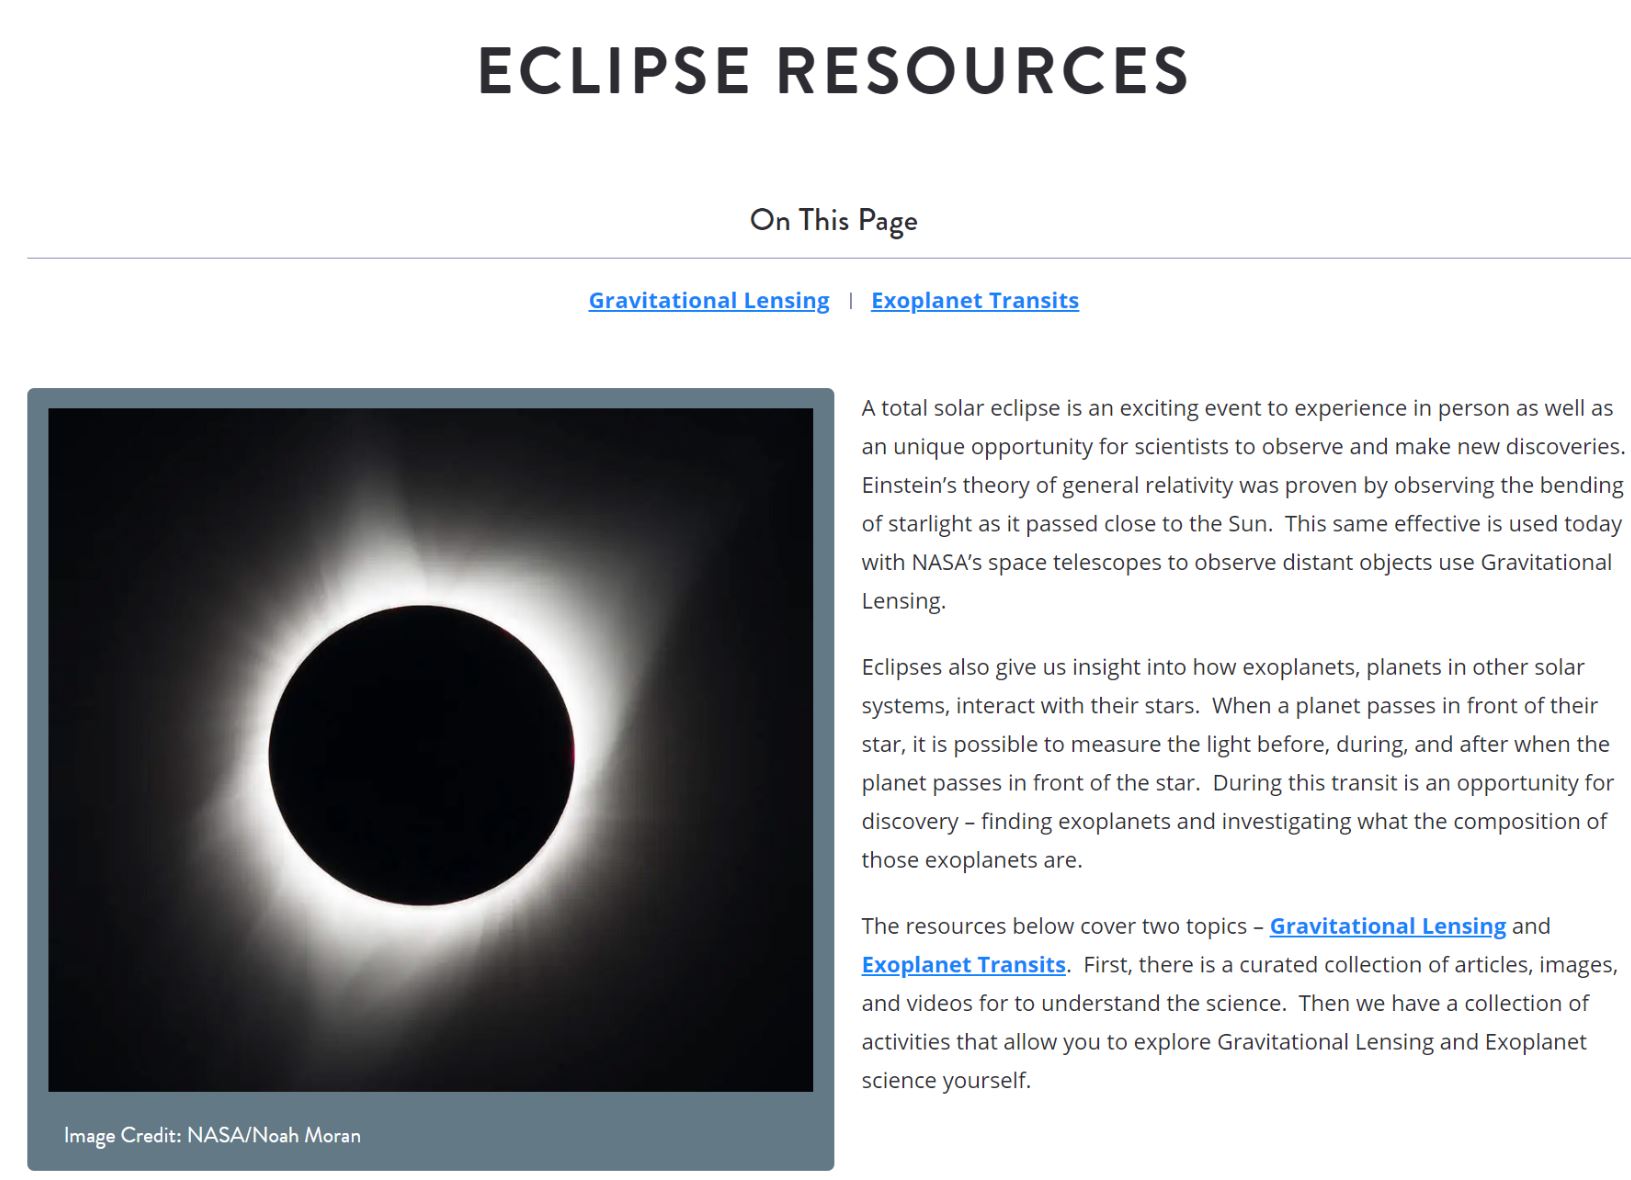 Screenshot of NASA's Universe of Learning Eclipse Resources webpage with text sharing "On This Page" and an image of a total solar eclipse.